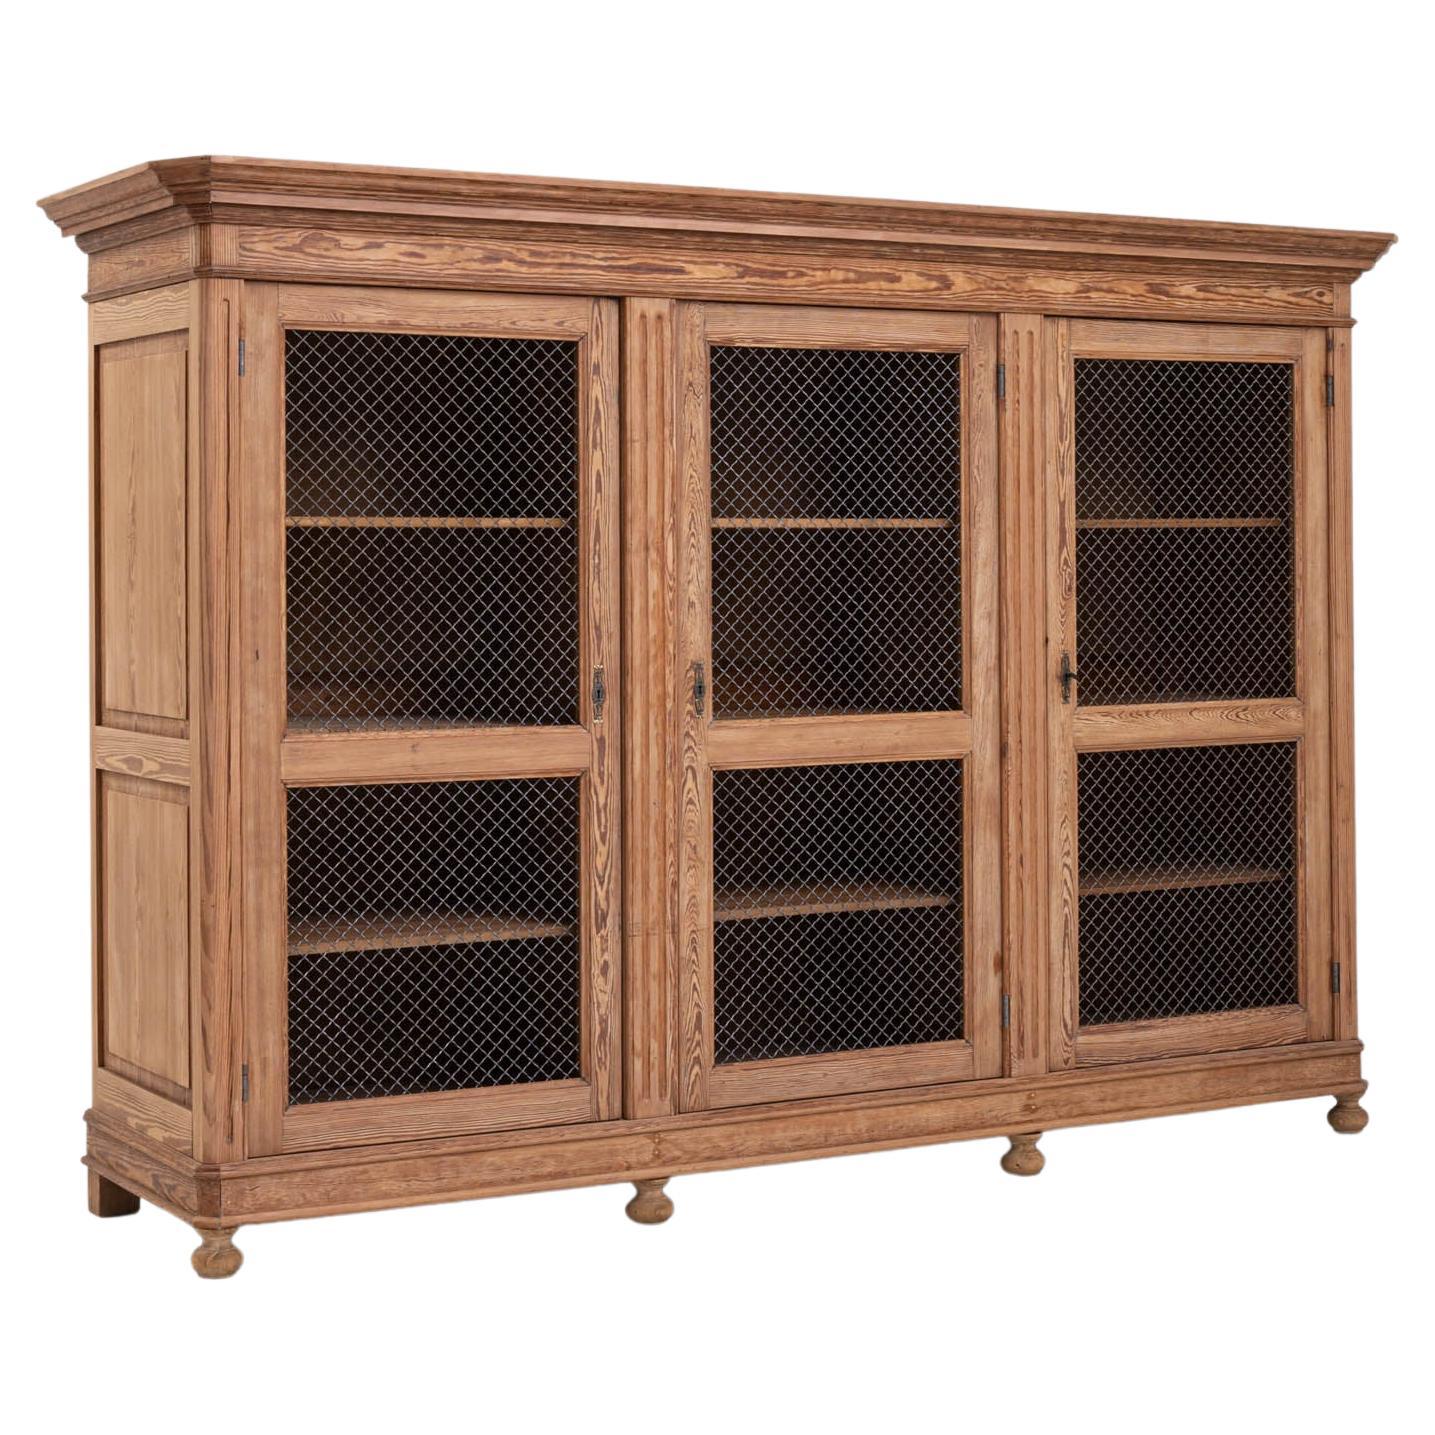 19th Century French Wooden Cabinet For Sale